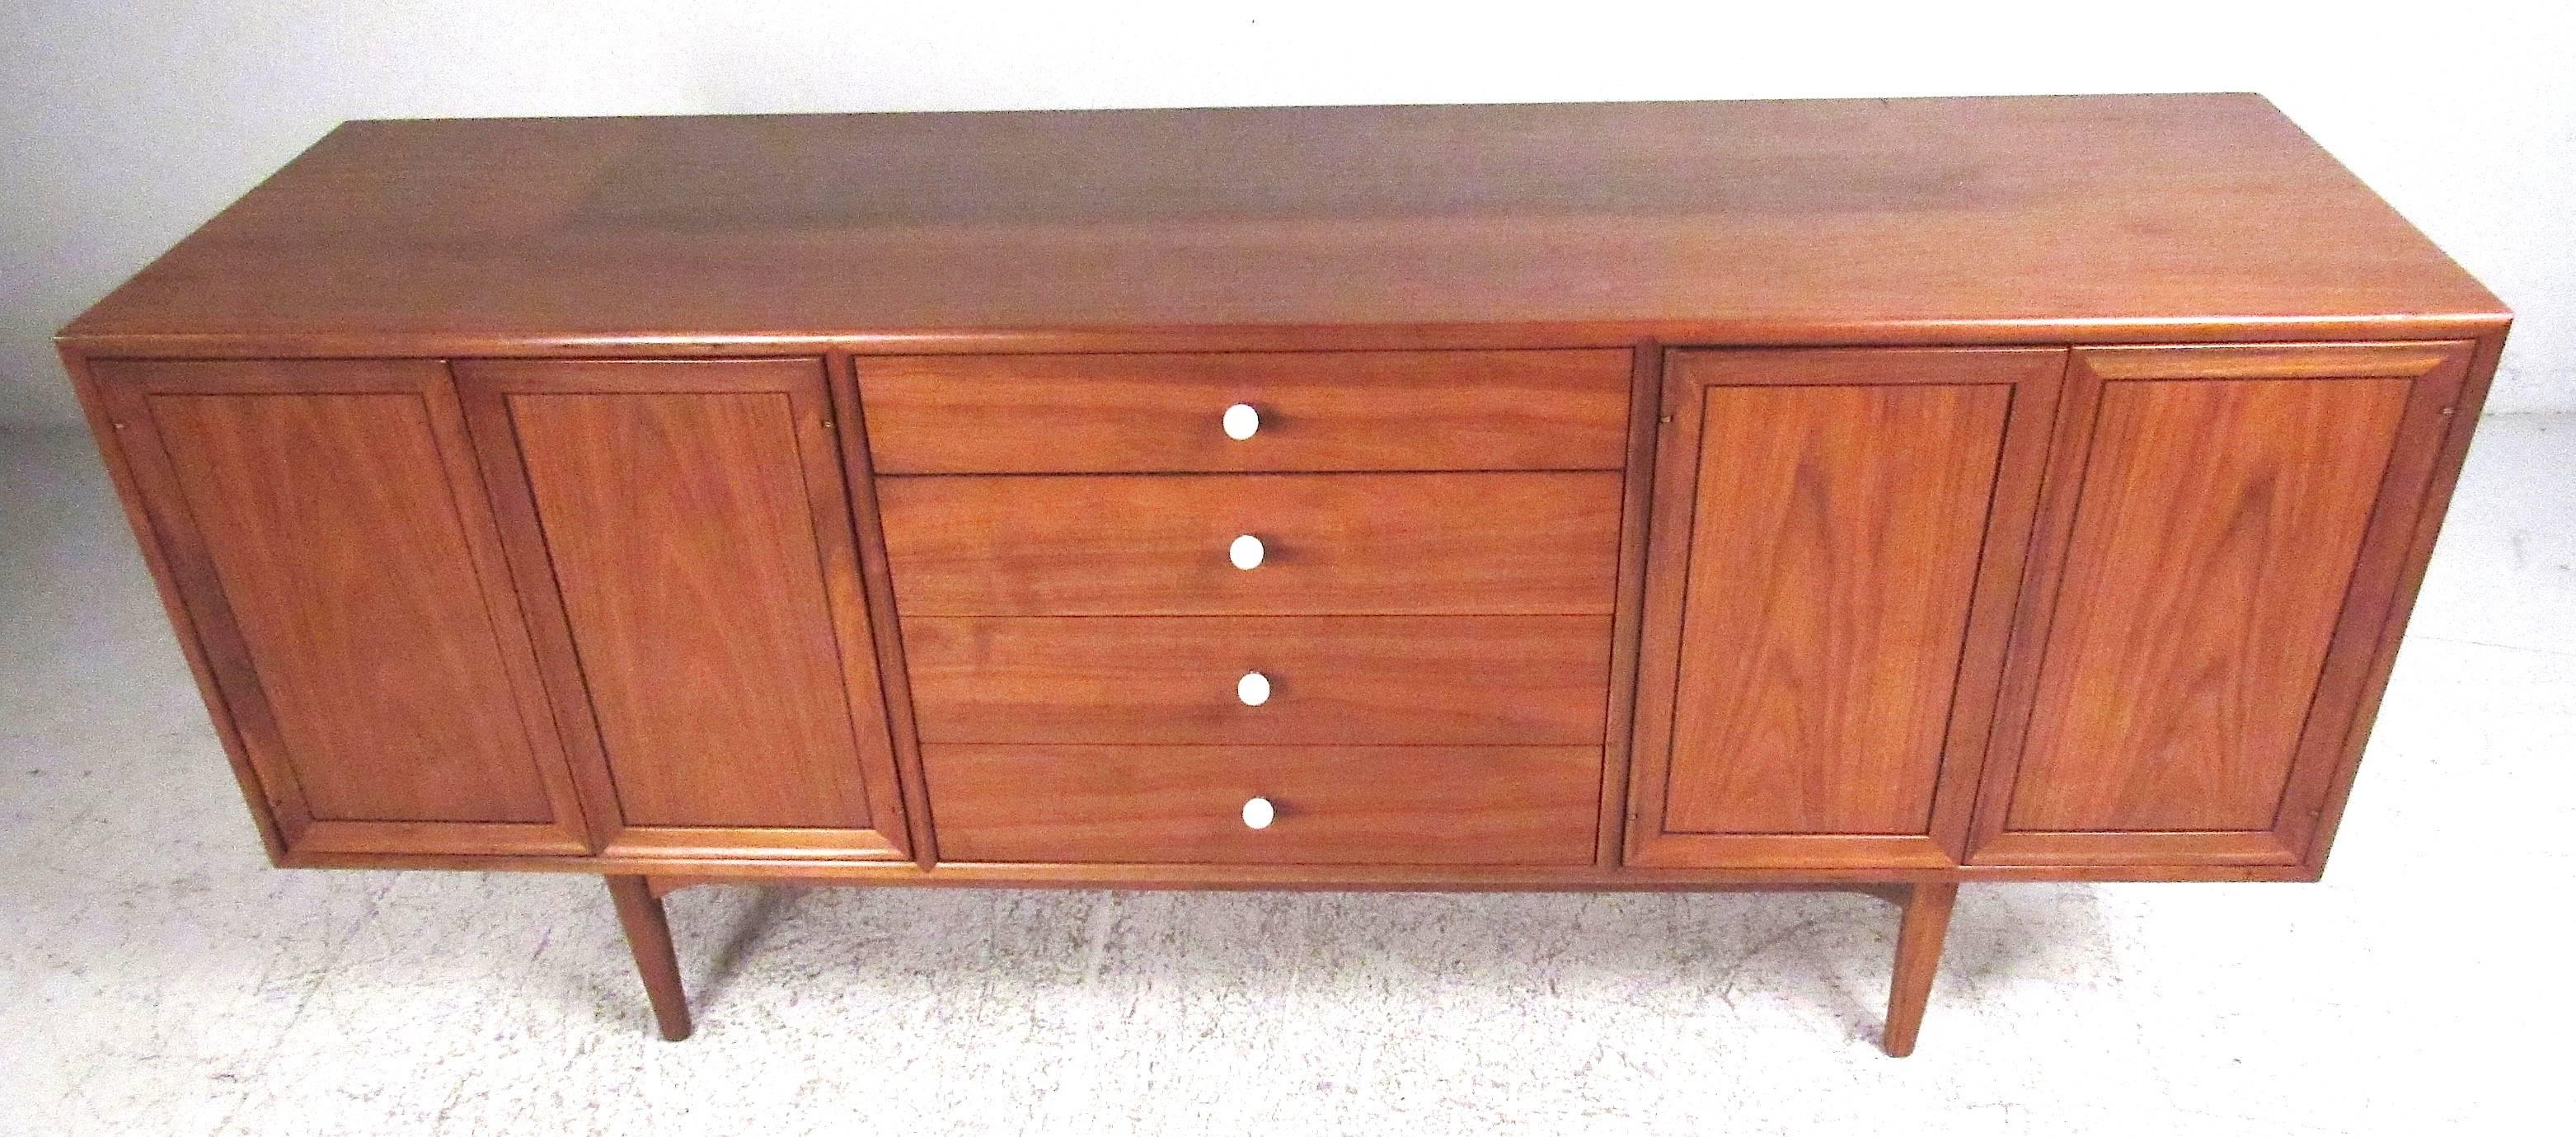 Midcentury Drexel Declaration credenza by Kipp Stewart and Stewart McDougall. Featuring four center drawers accented by white porcelain pulls, with double door storage compartments on both sides. Matching china cabinet which sits atop available (see